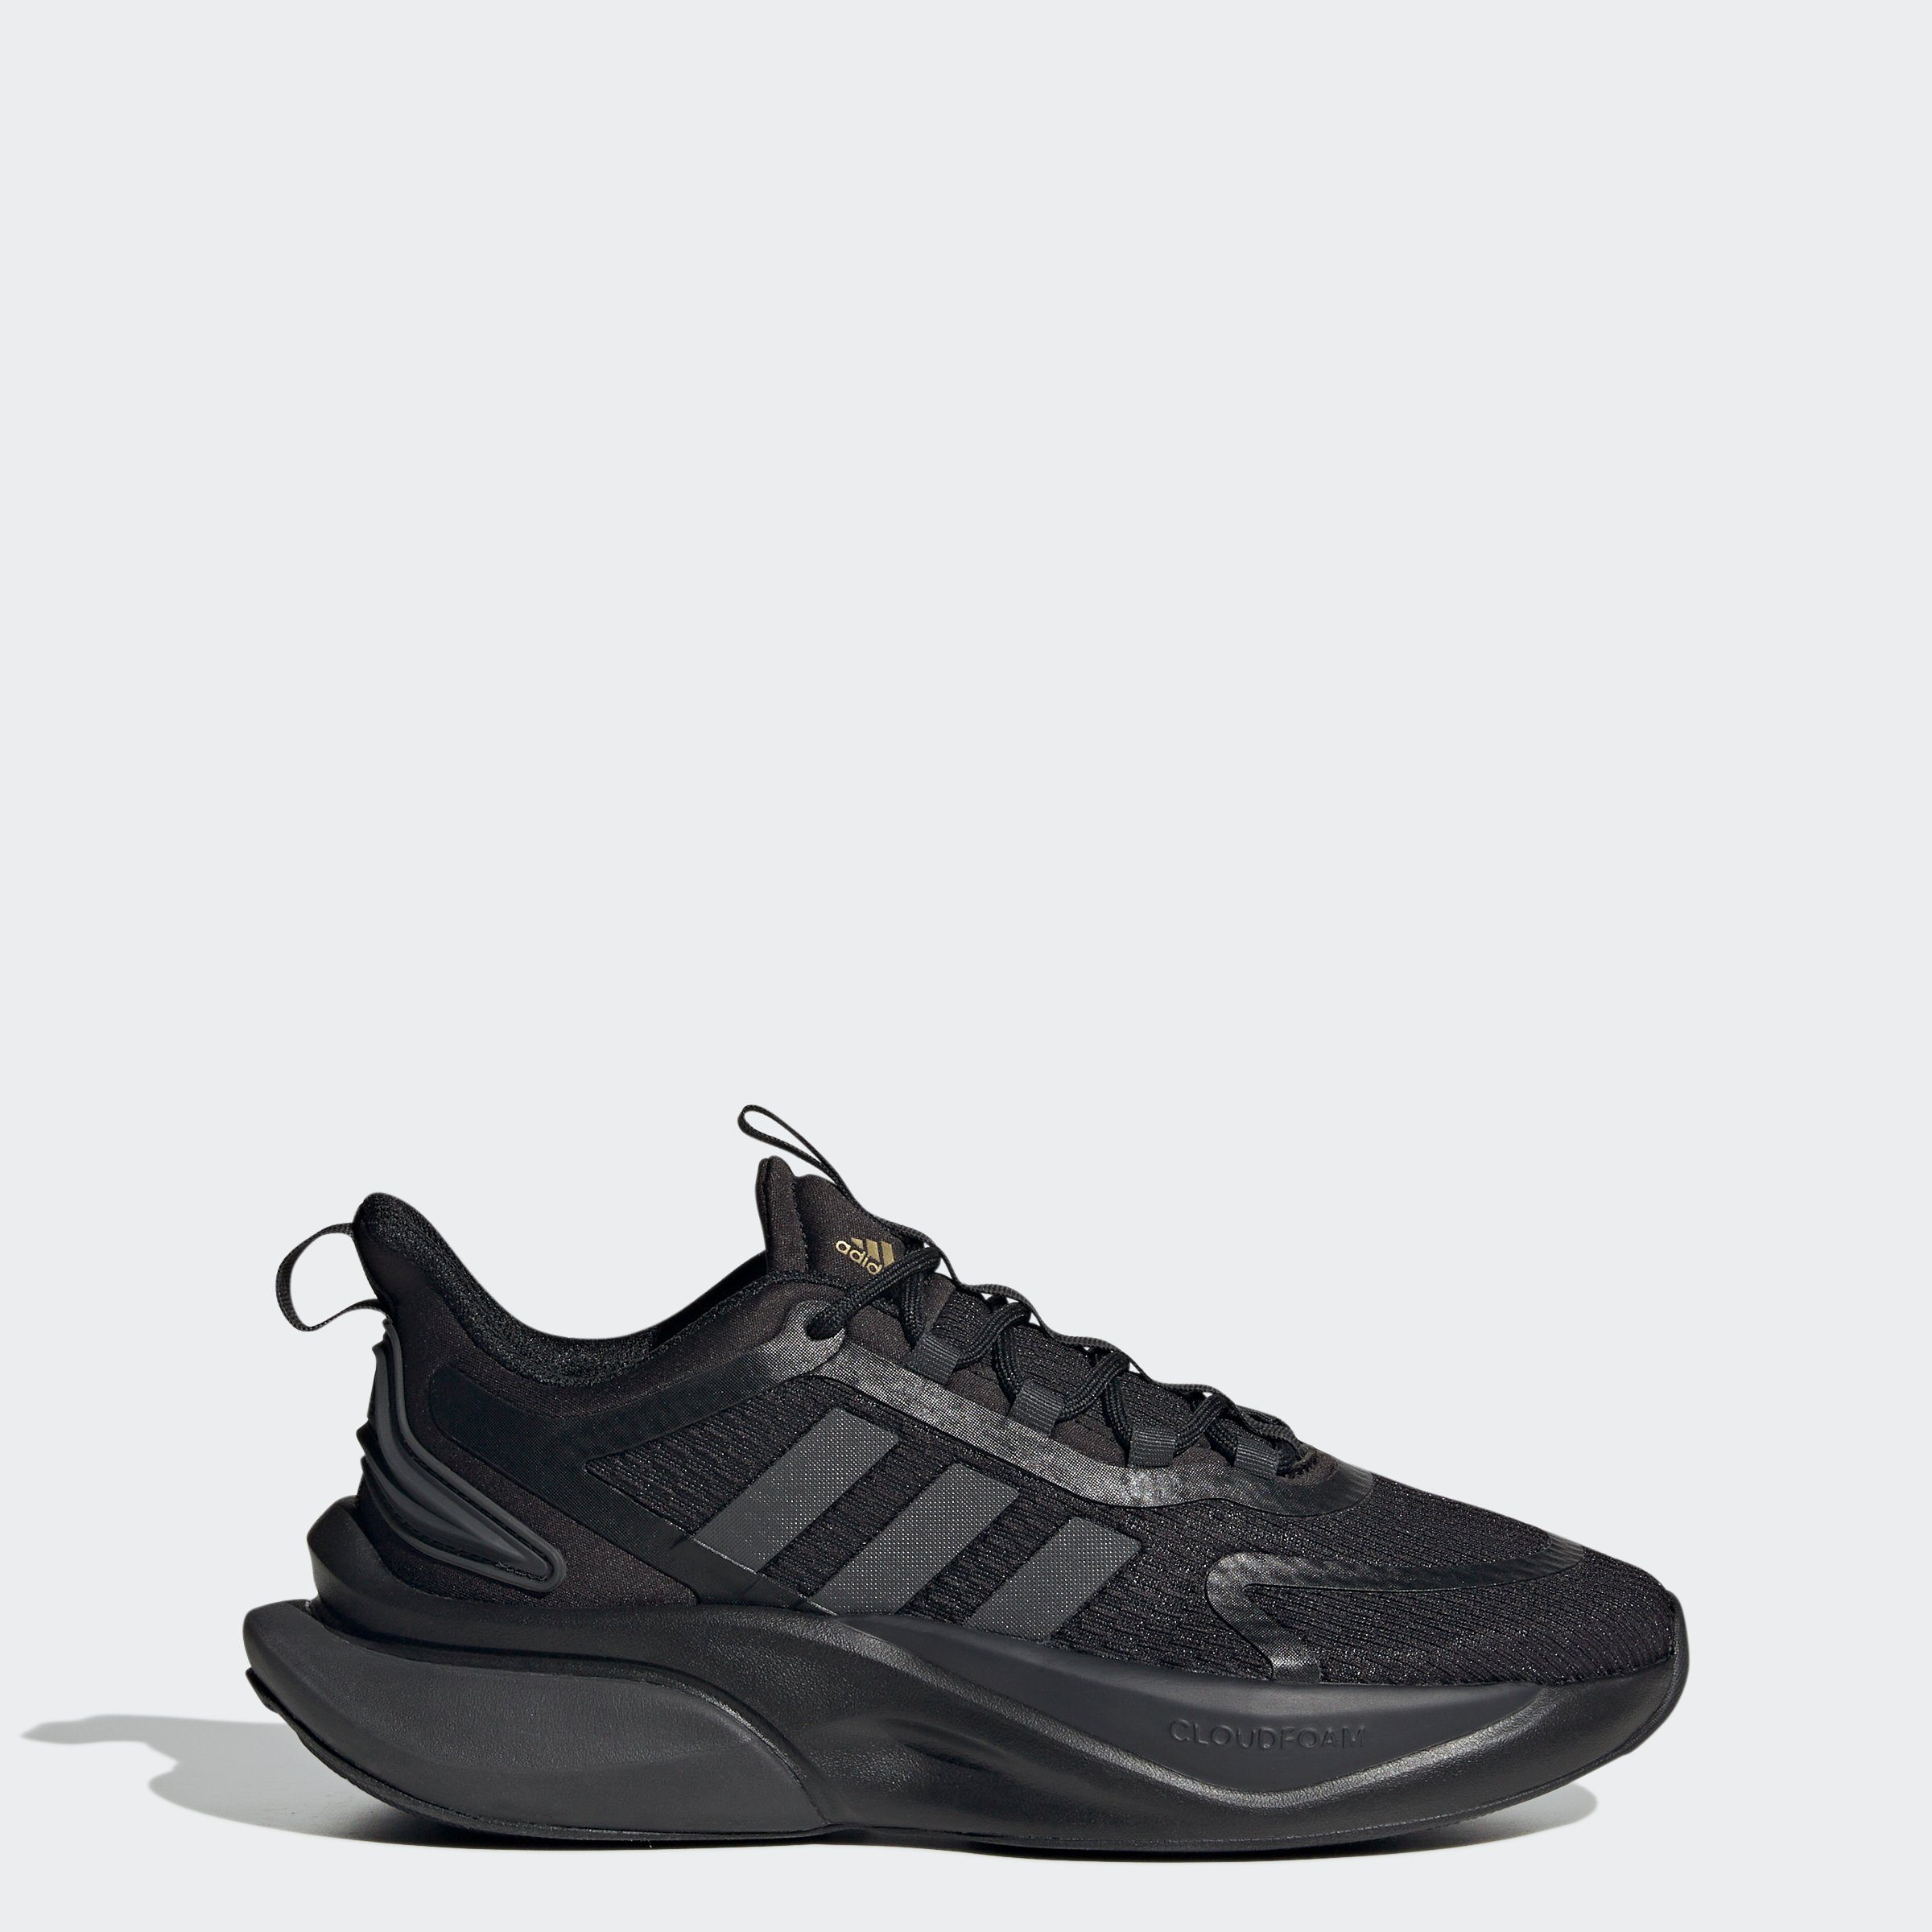 adidas Sportswear ALPHABOUNCE+ SUSTAINABLE Black / / Gold Metallic BOUNCE Core Sneaker Carbon